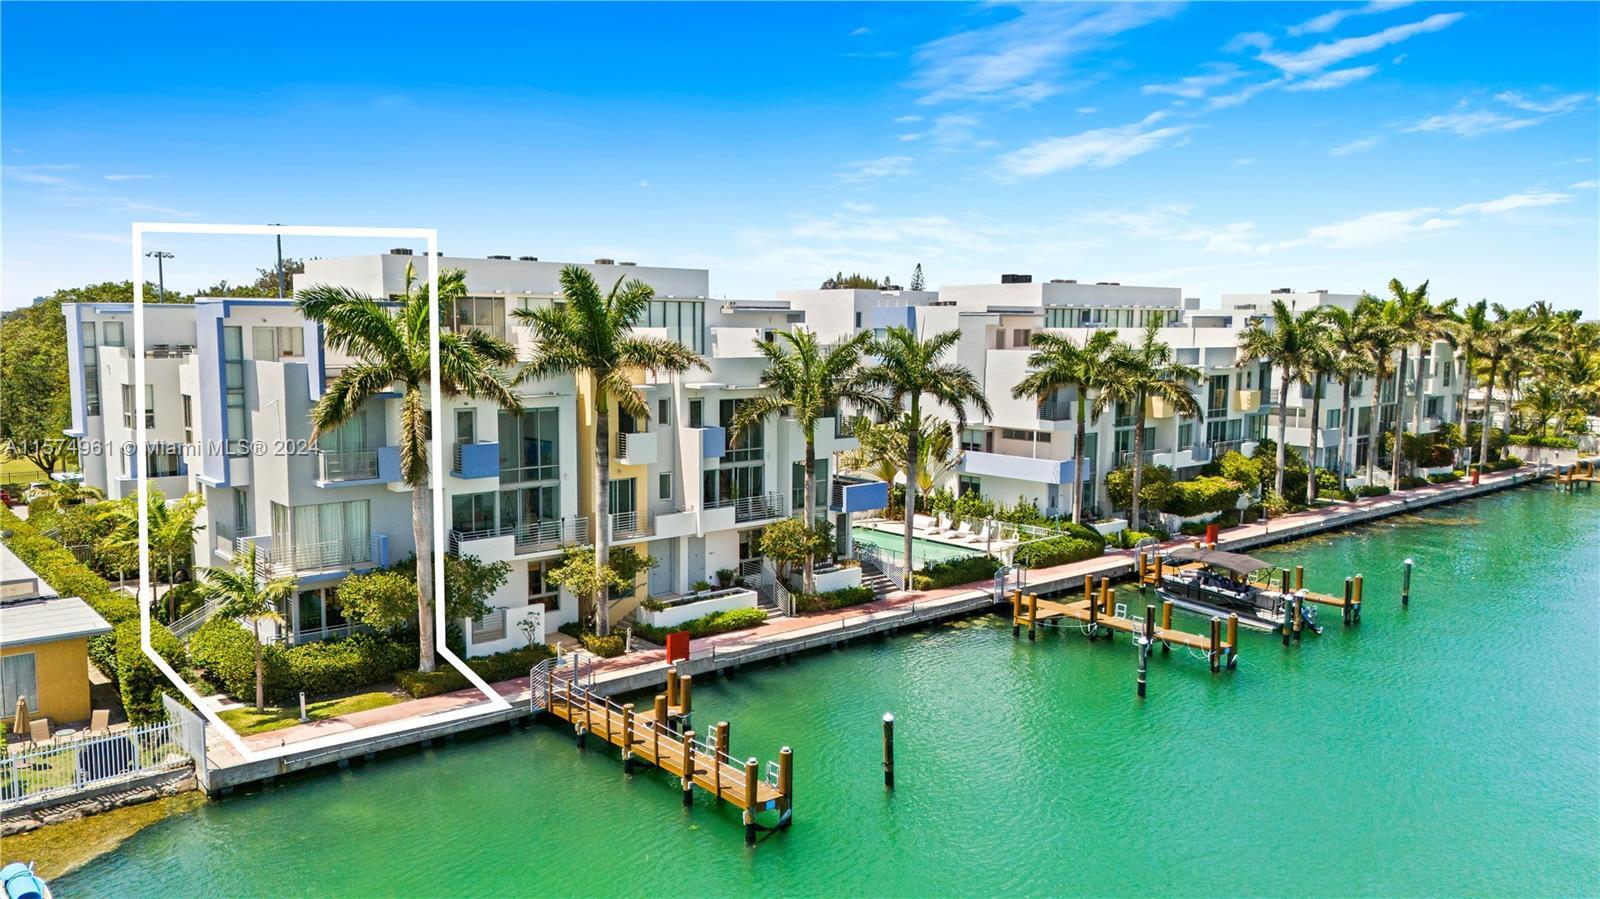 Indulge in waterfront luxury with this elegant 3Bed/3.5Bath townhouse corner unit + rooftop terrace.